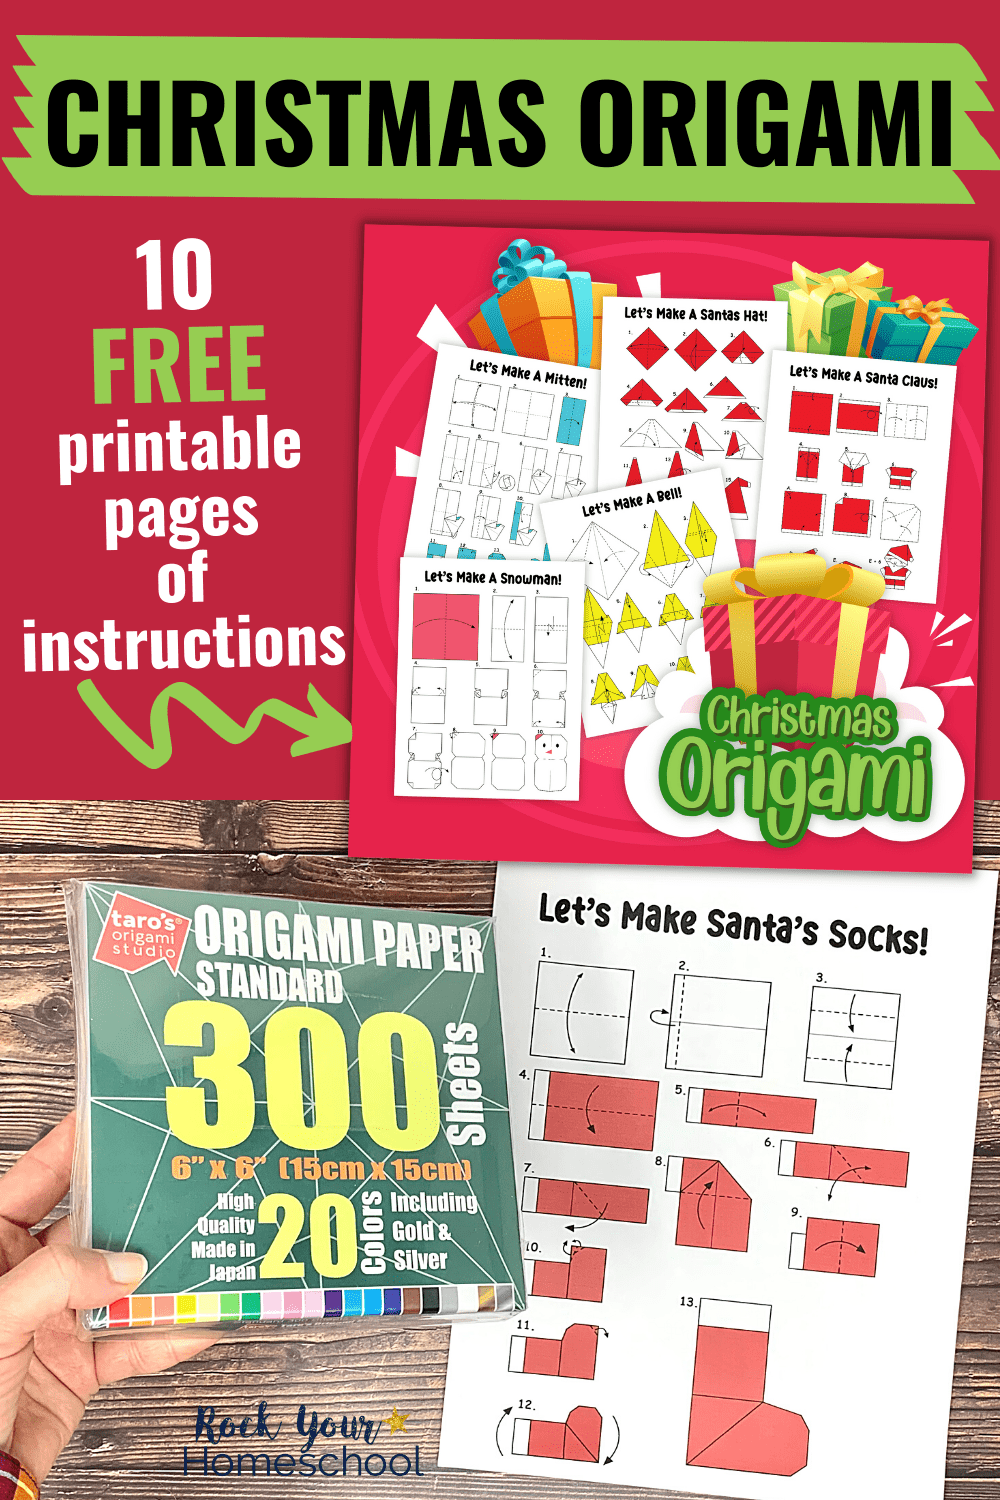 10 Free Printable Christmas Origami Instructions for Hands-On Holiday Fun